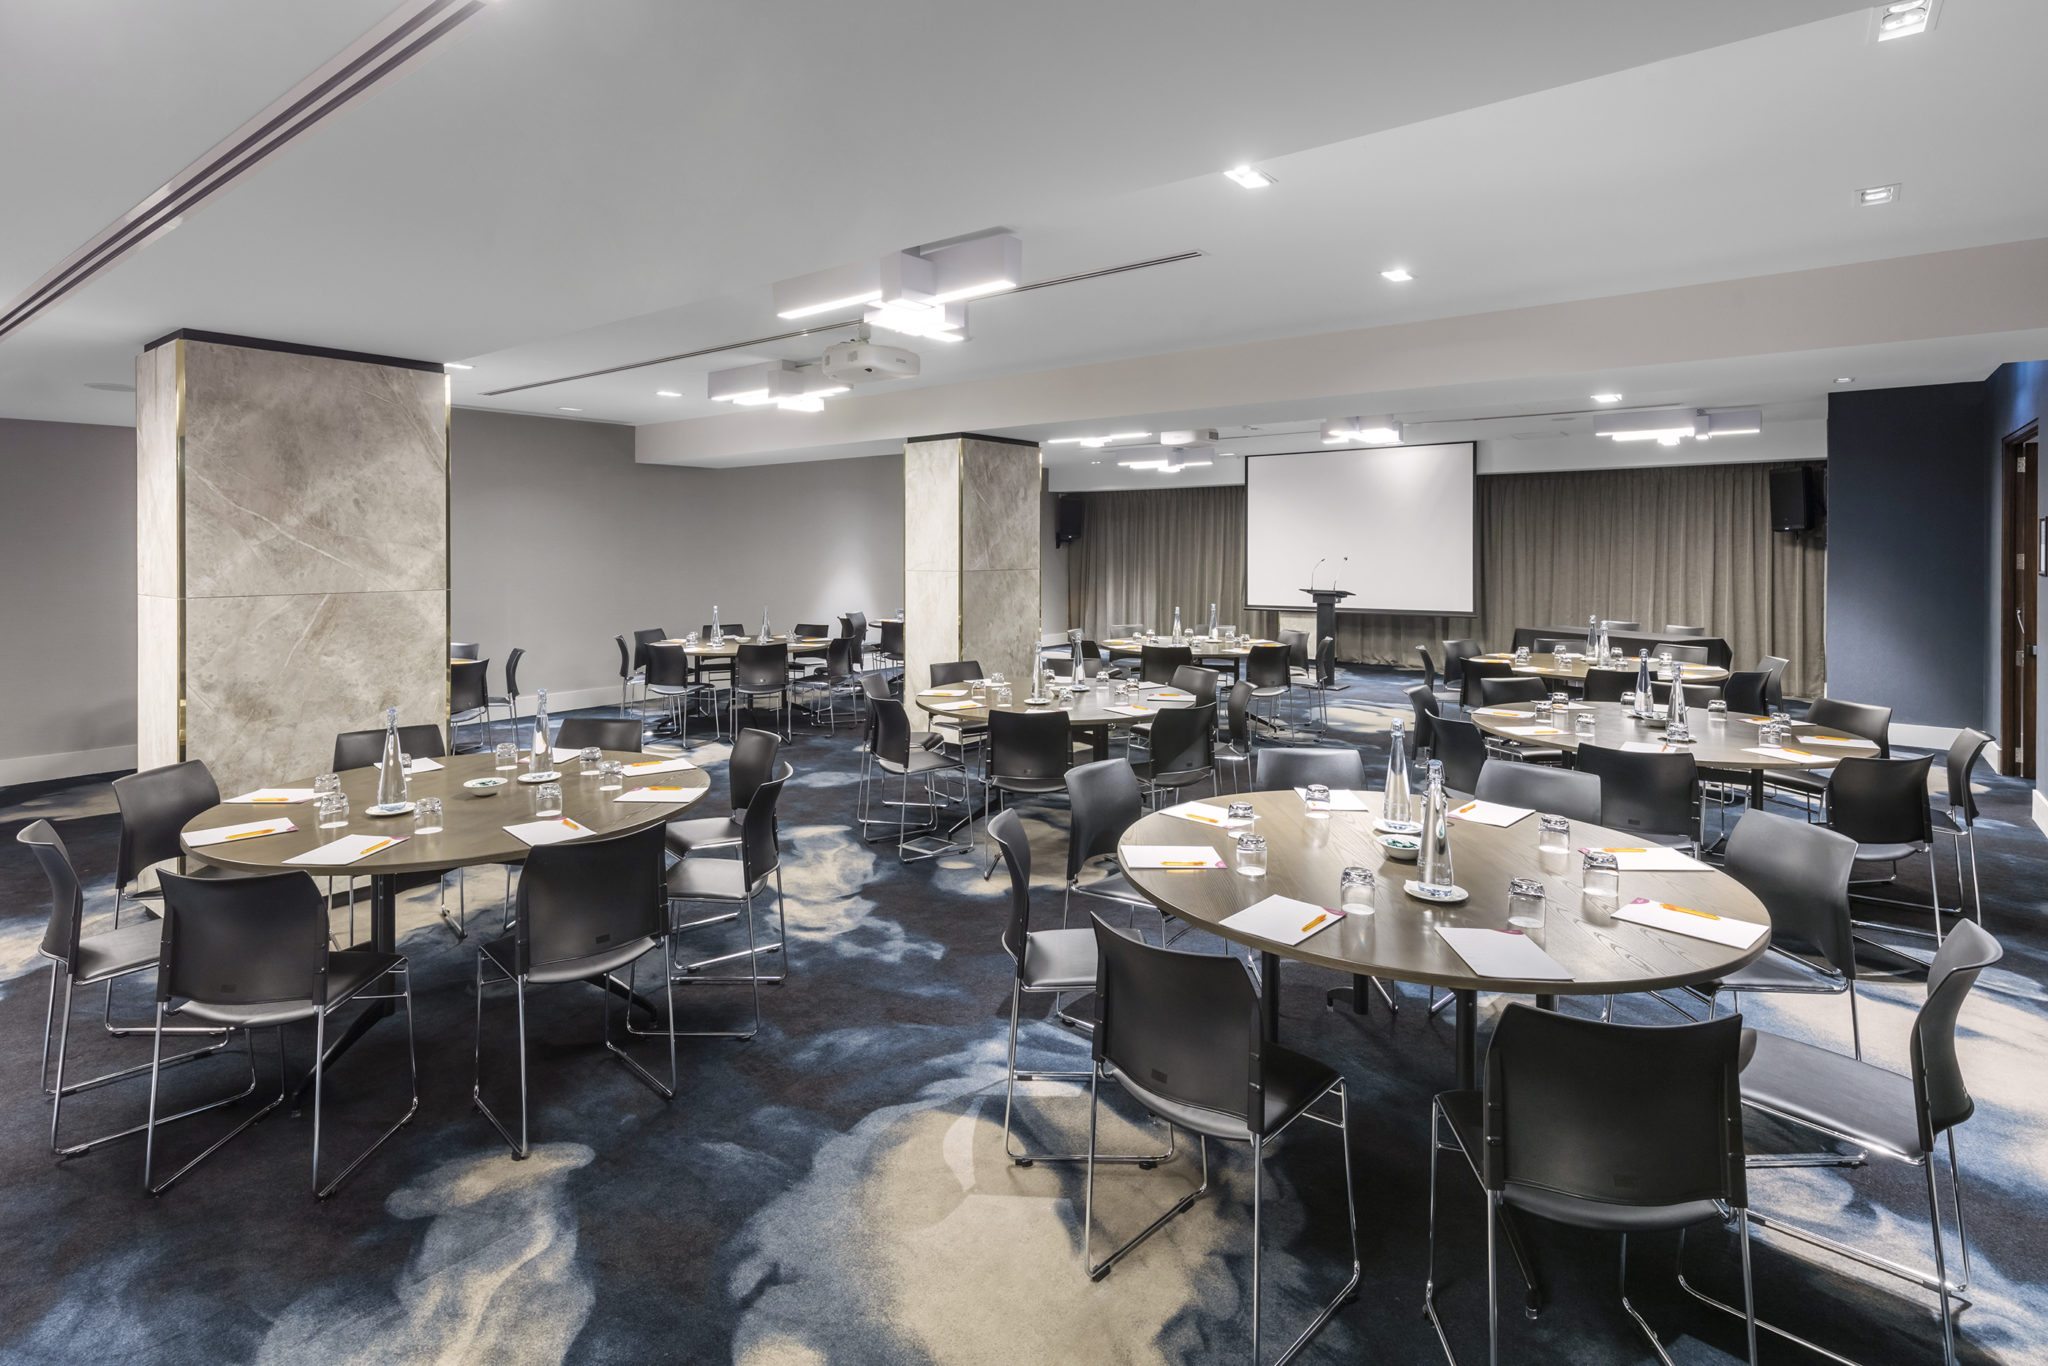 Golden Fleece Room at Crowne Plaza Christchurch Hotel & Accommodation. Meetings & Events.